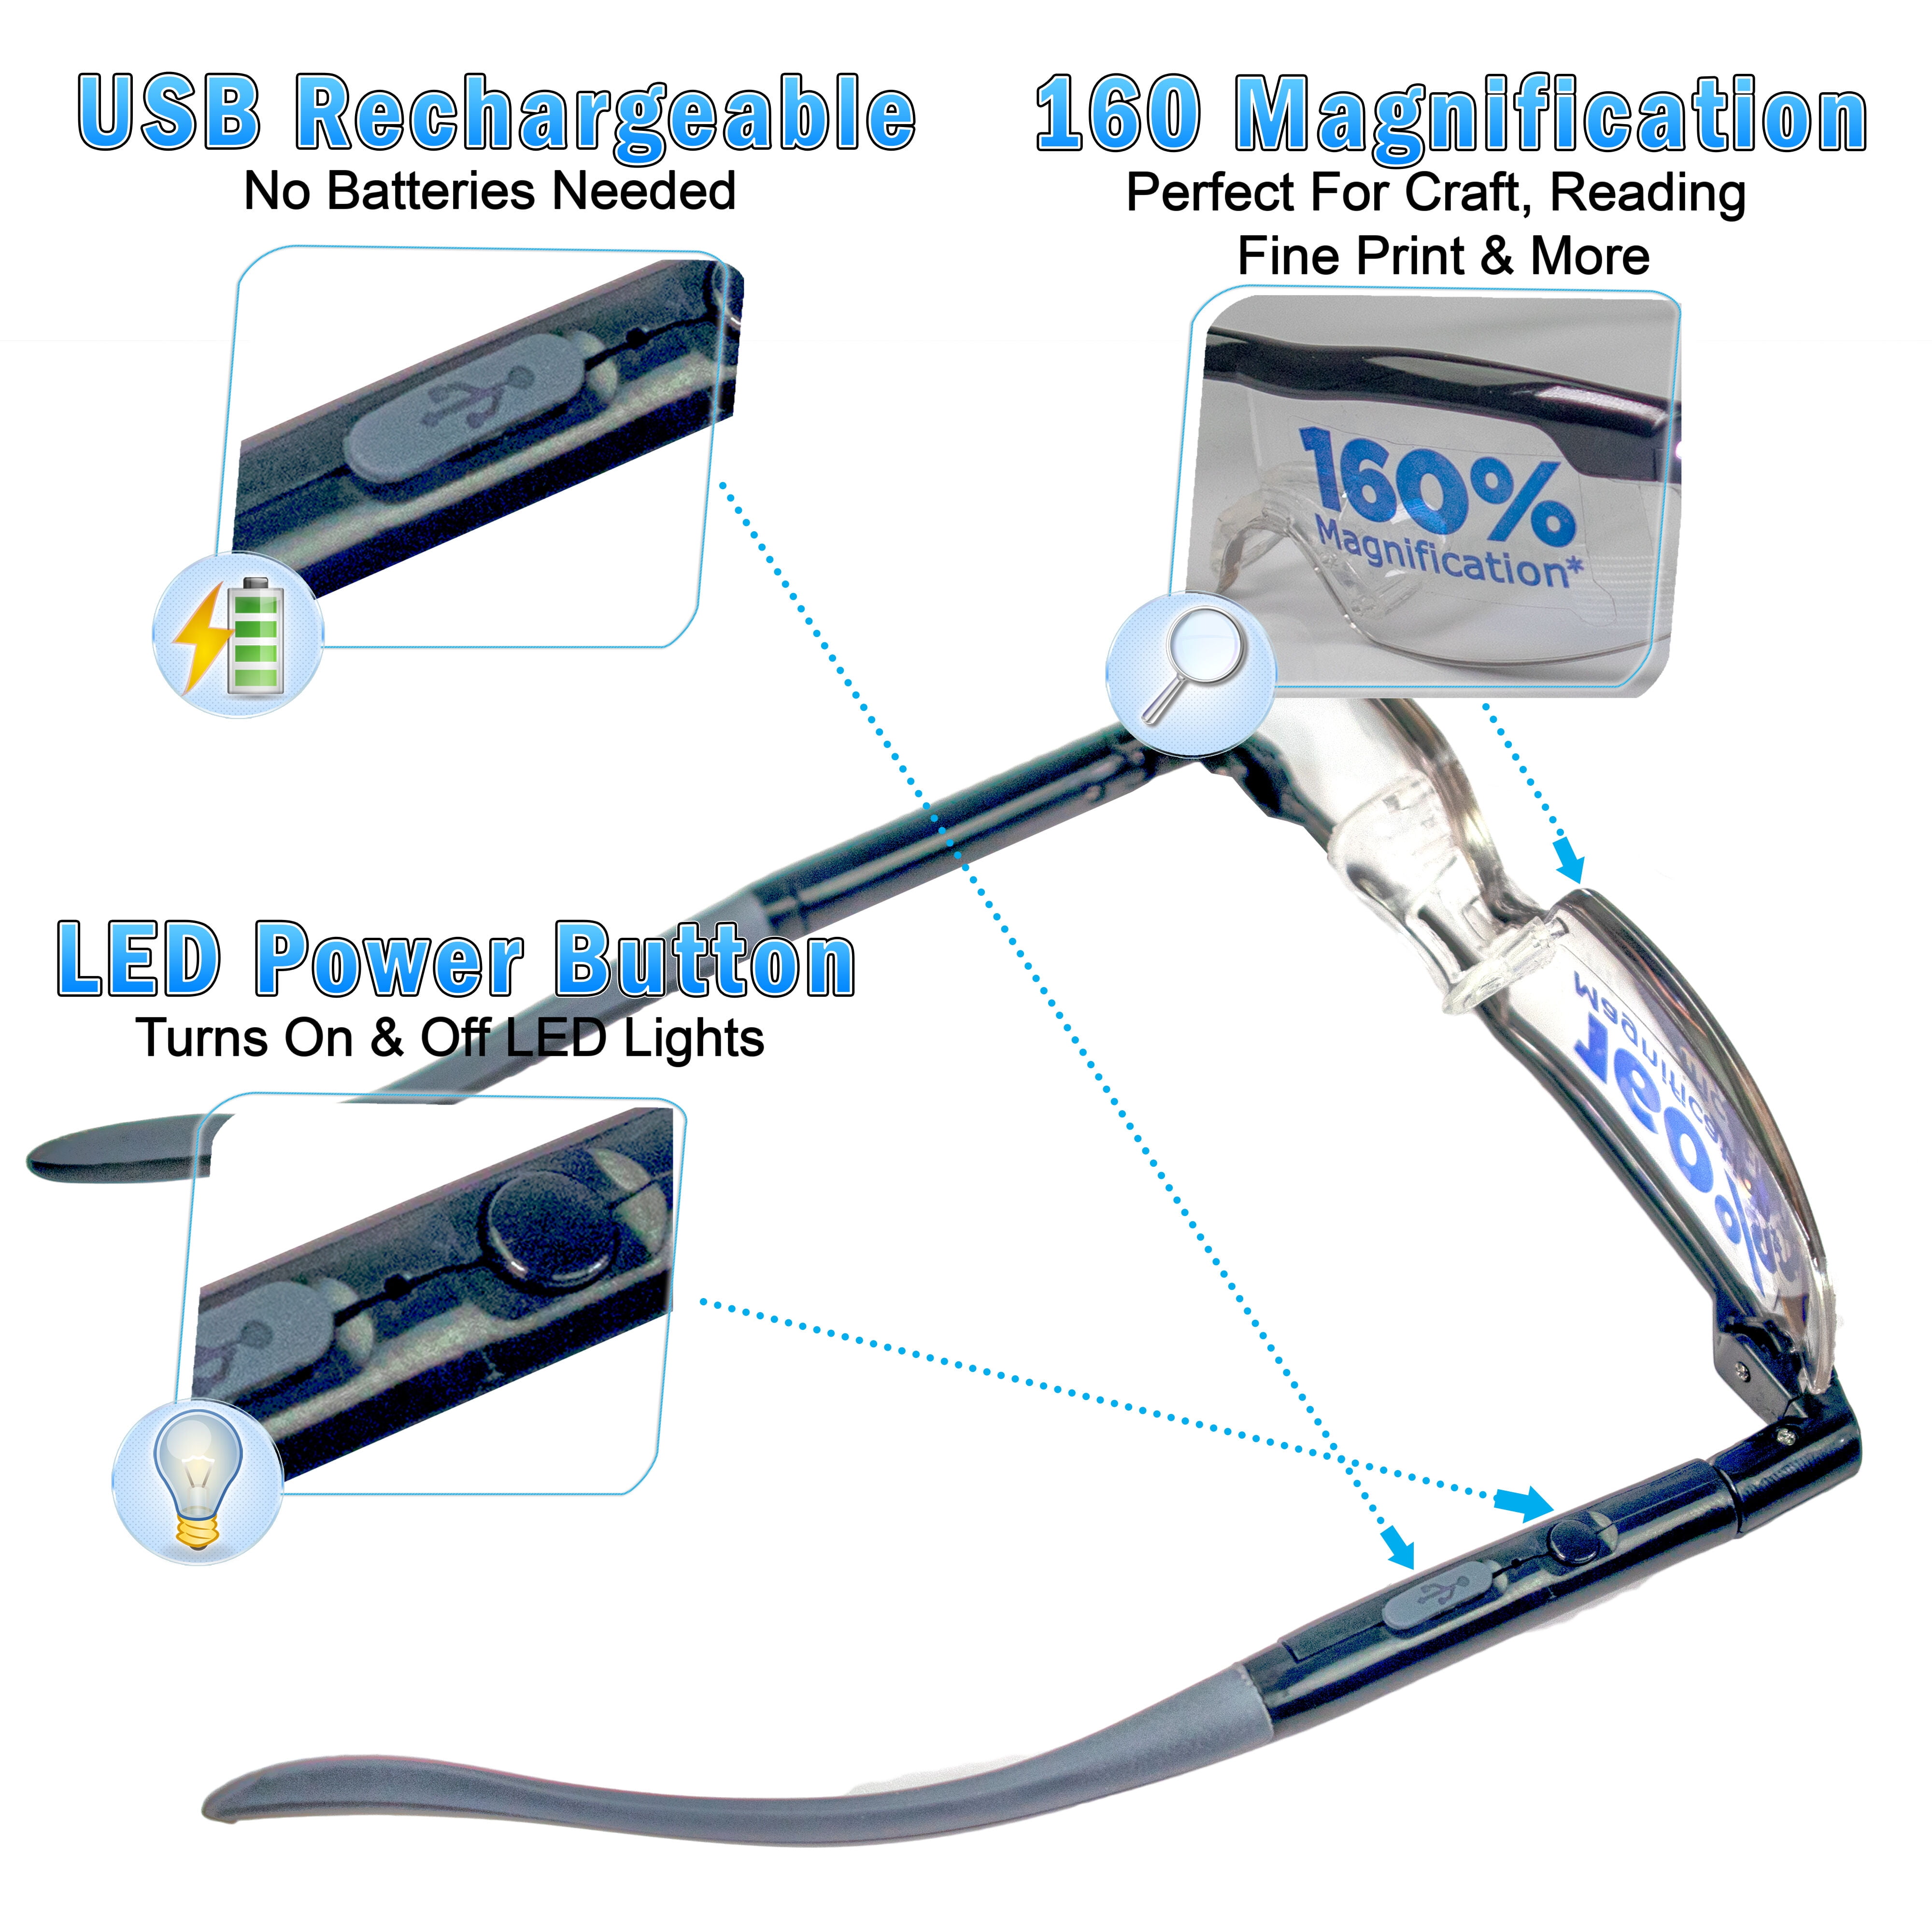 Morease LED Magnifying Glasses Sight Enhancing Bright Eyewear- 160%  Magnification - UPGRADED USB Rechargeable 